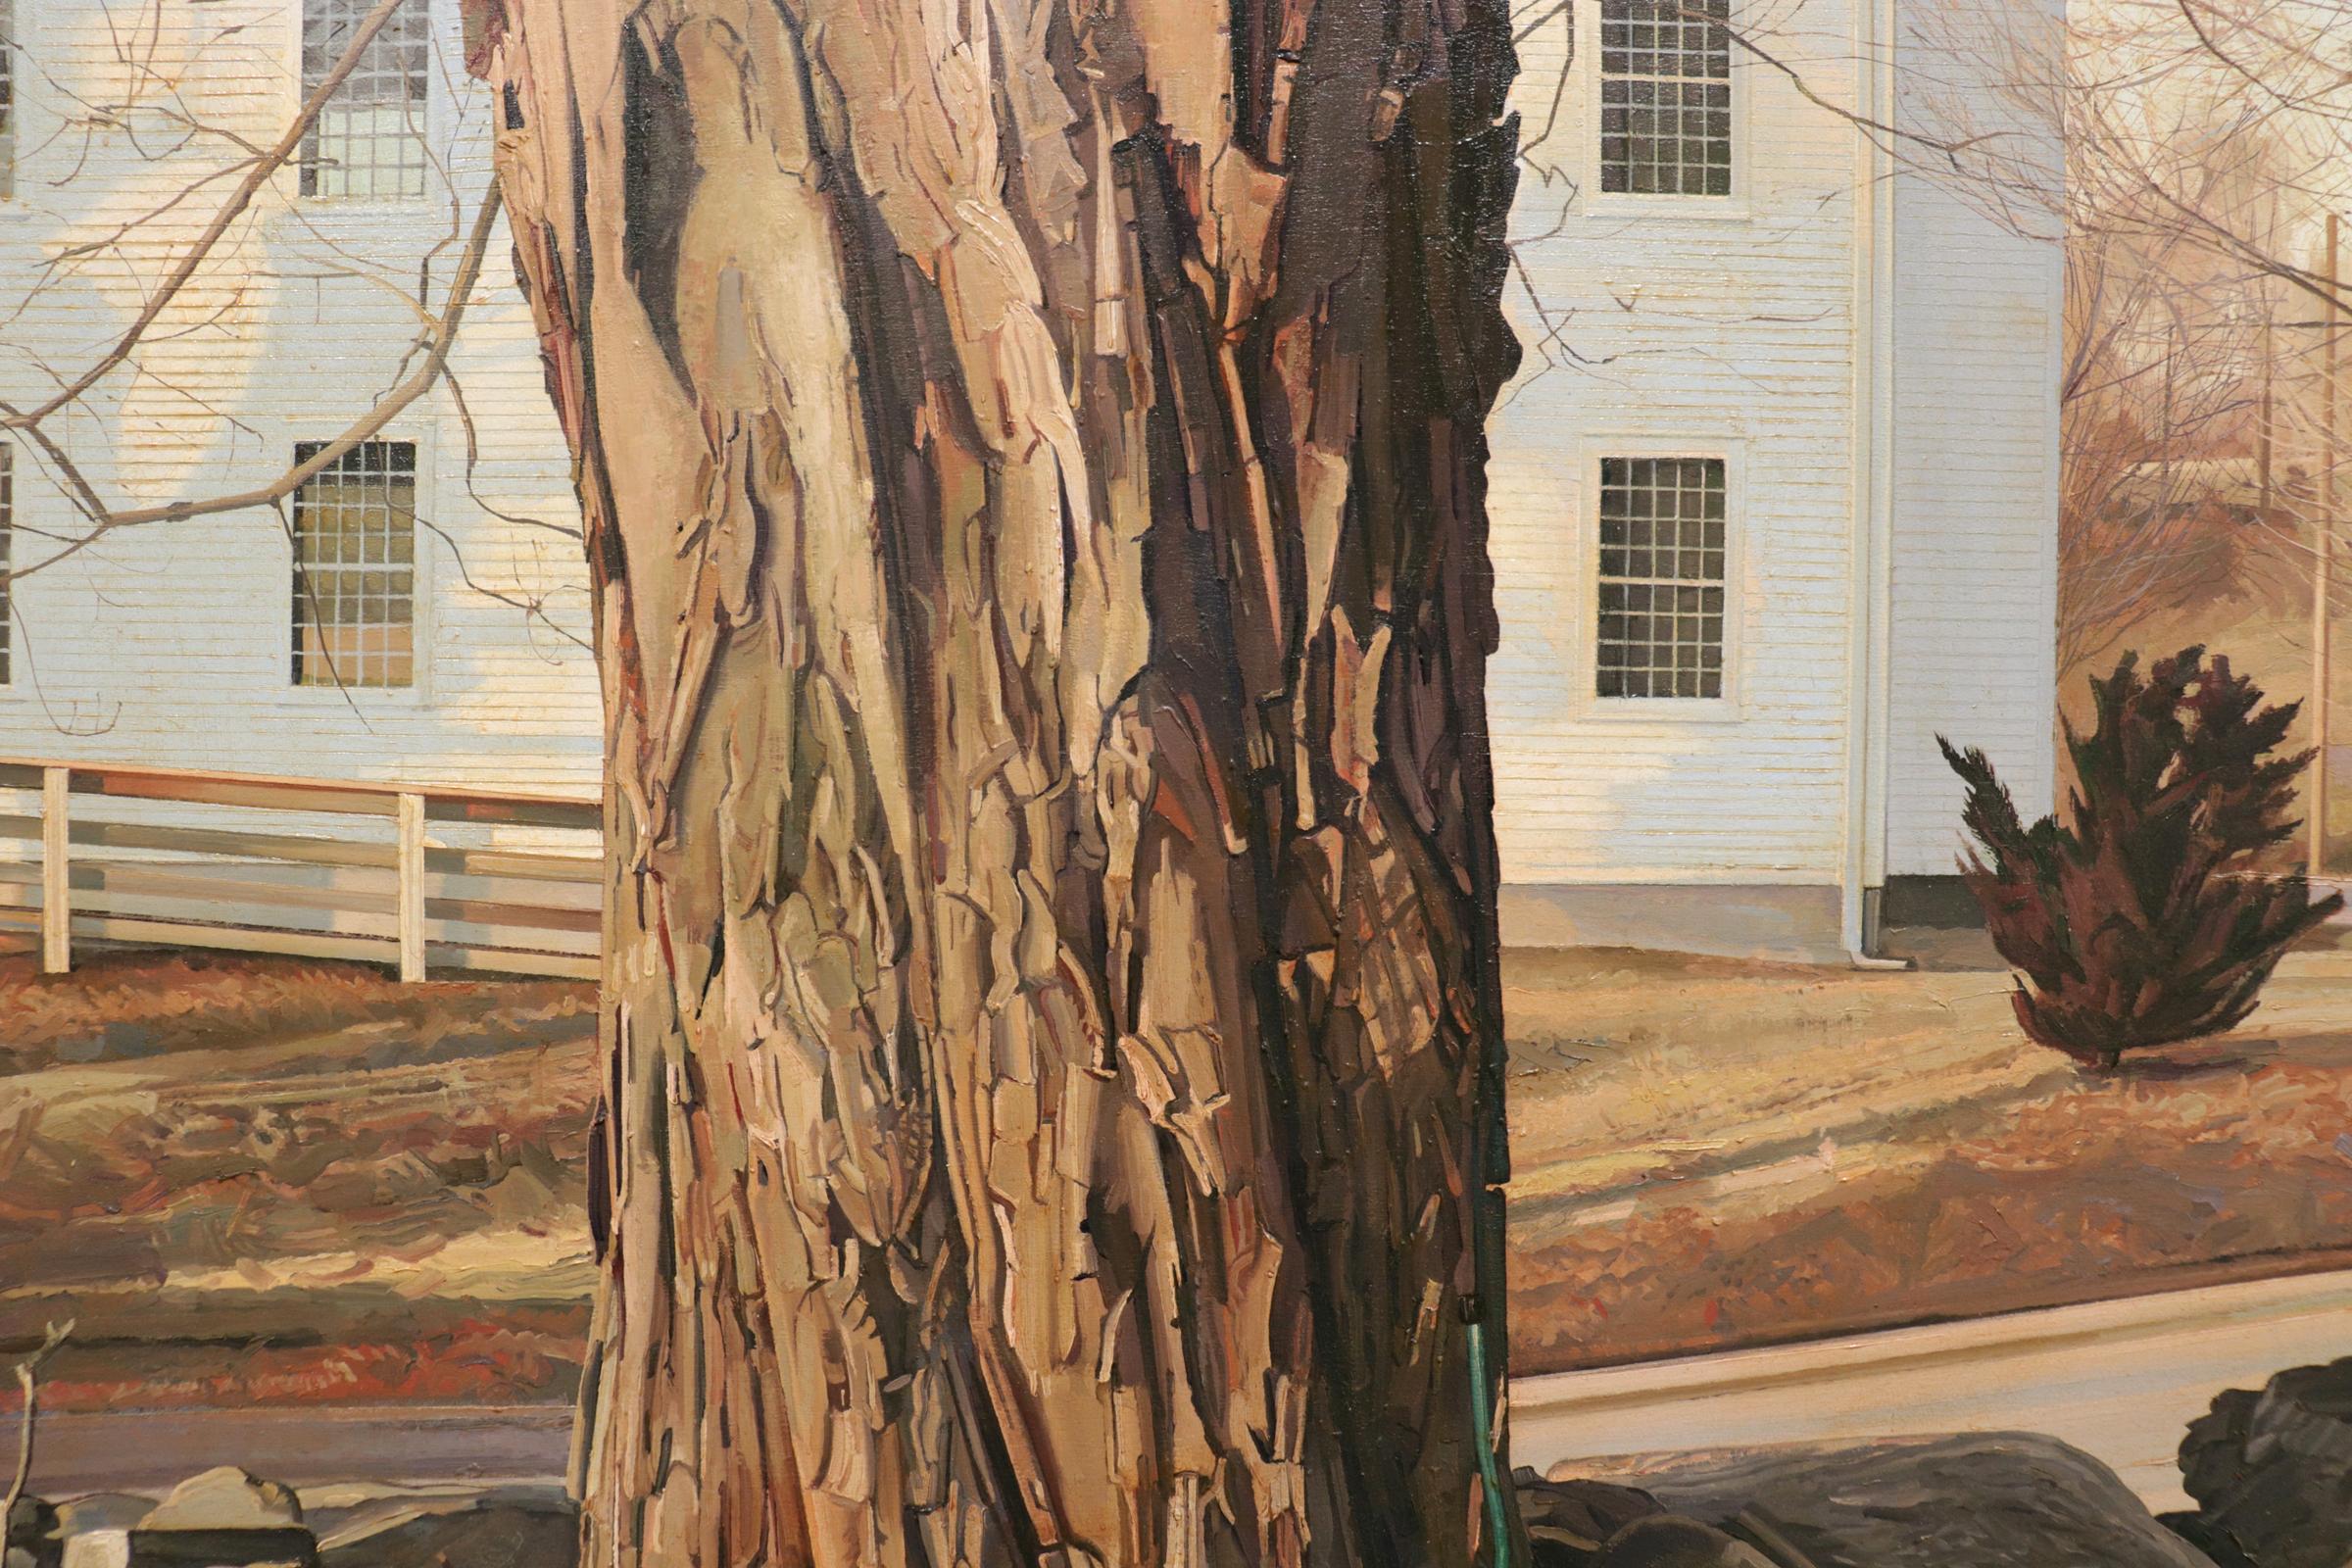 SERVICE, tree, white house in background, hyper-realism, country house, woods - Painting by Trey Friedman